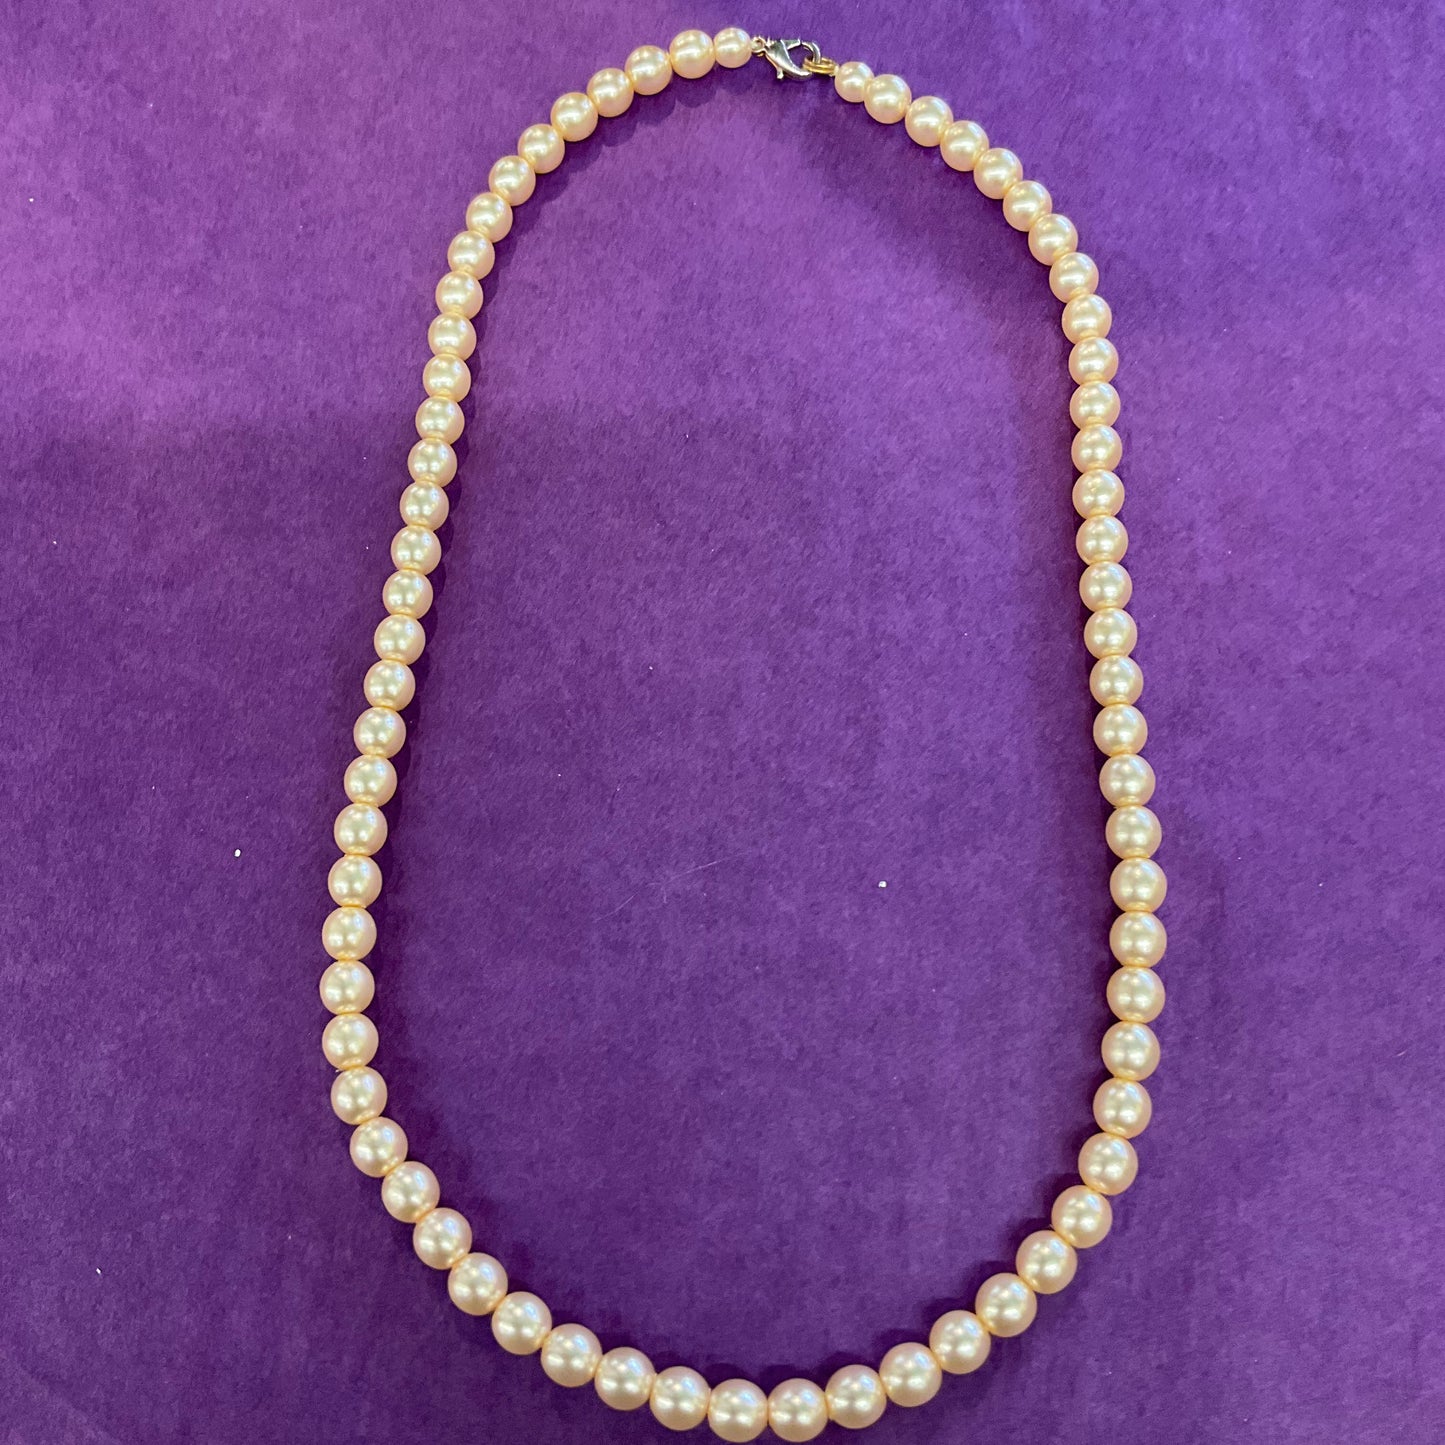 Vintage 1950s classic Faux pearls, wedding, gift for her